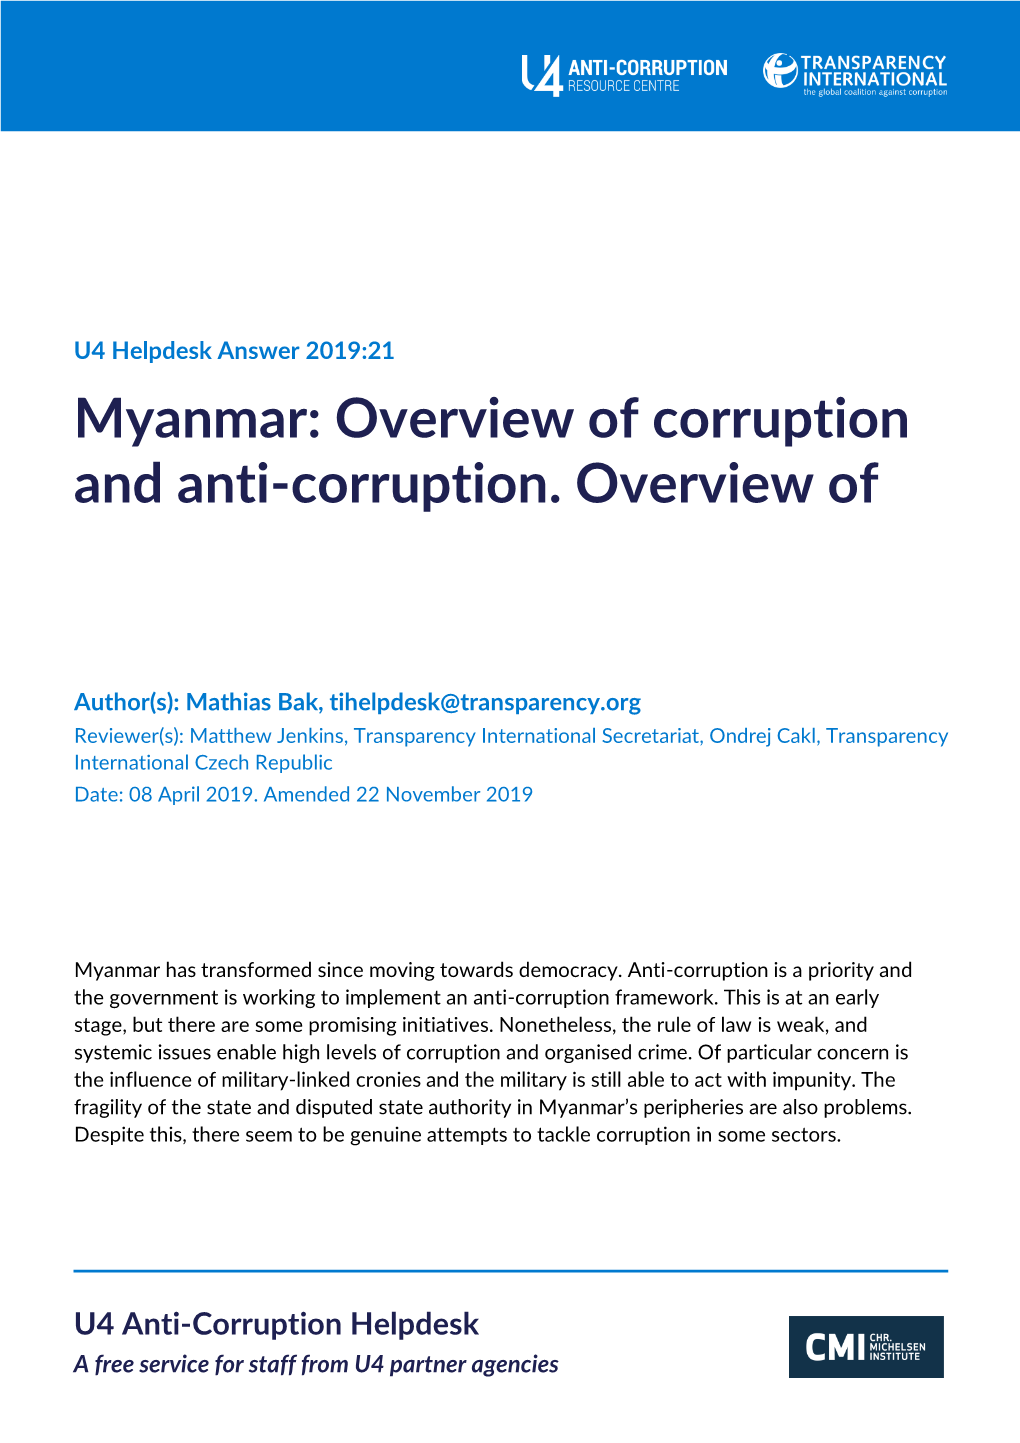 Myanmar: Overview of Corruption and Anti-Corruption